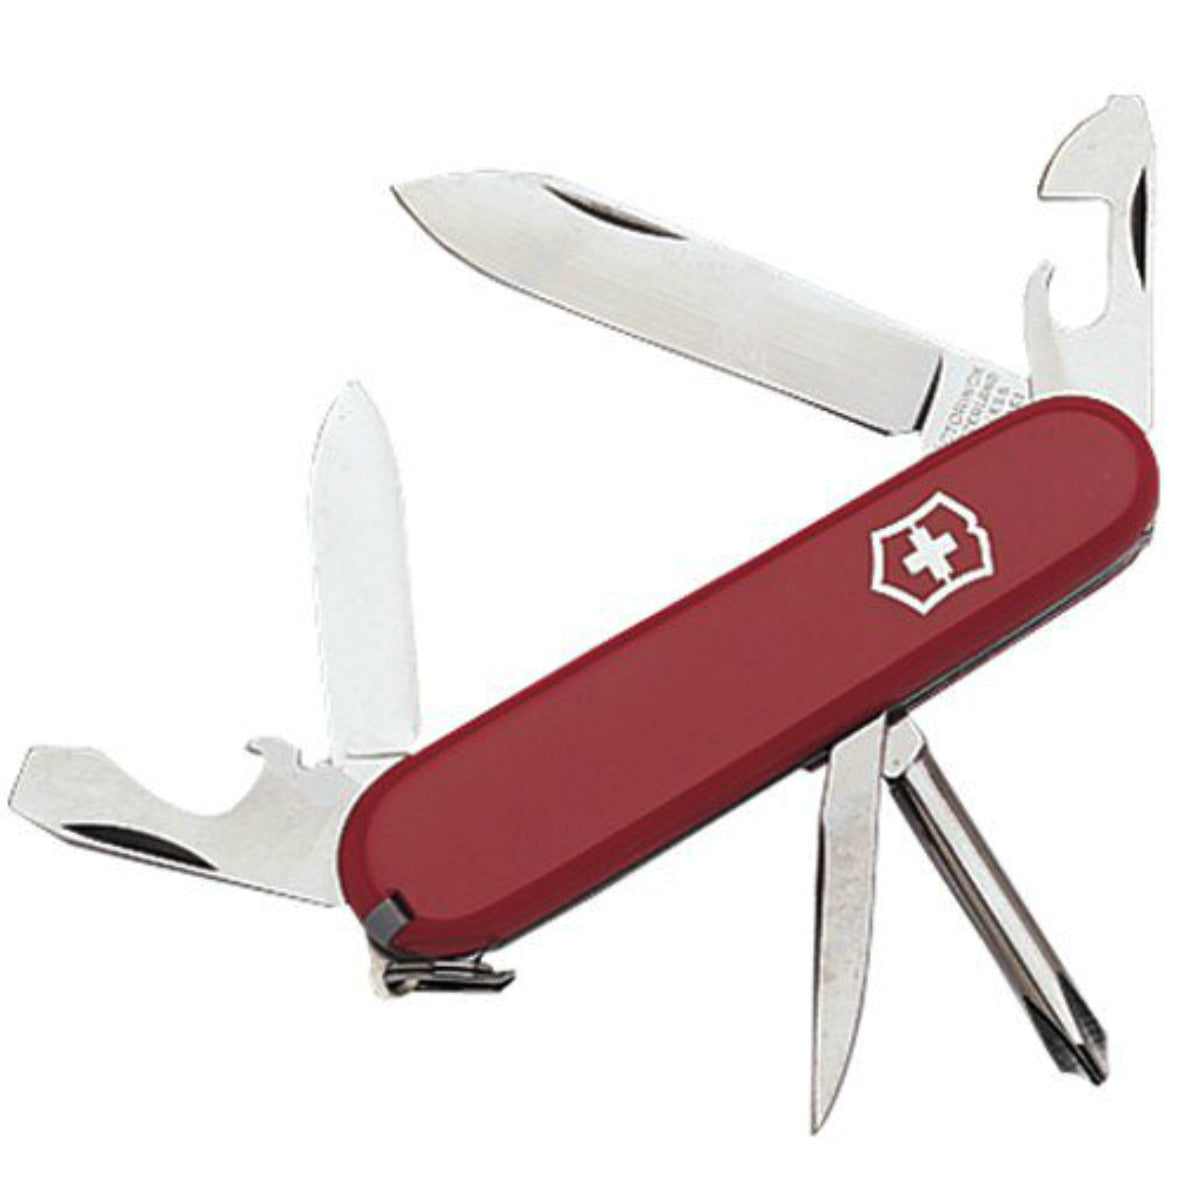 buy outdoor folding knives at cheap rate in bulk. wholesale & retail bulk sports goods store.